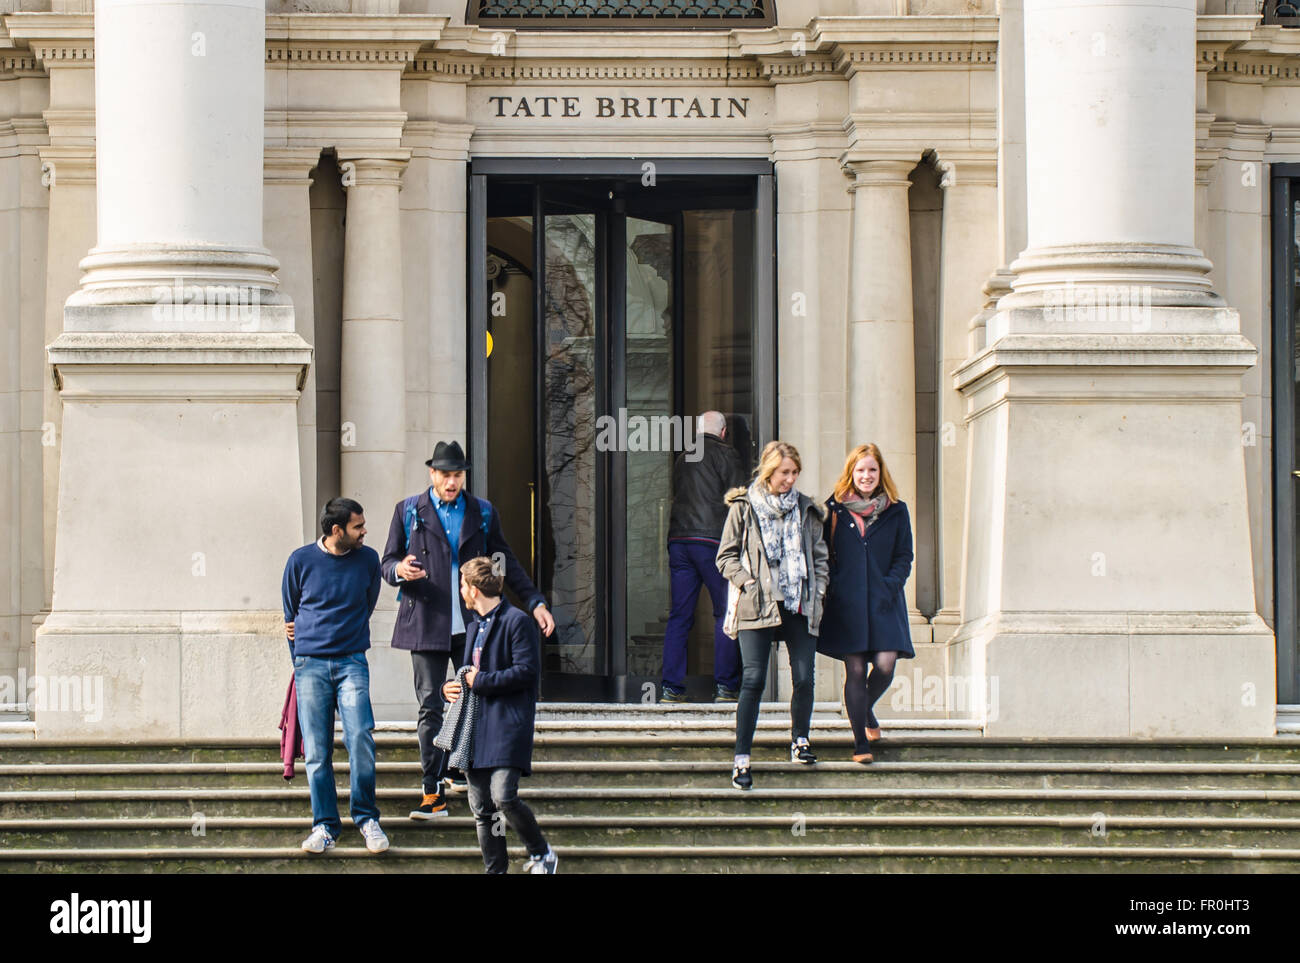 Tate Britain is an art museum on Millbank in London. It is part of the Tate network of galleries in England. Visitors leaving. People. Entrance steps Stock Photo